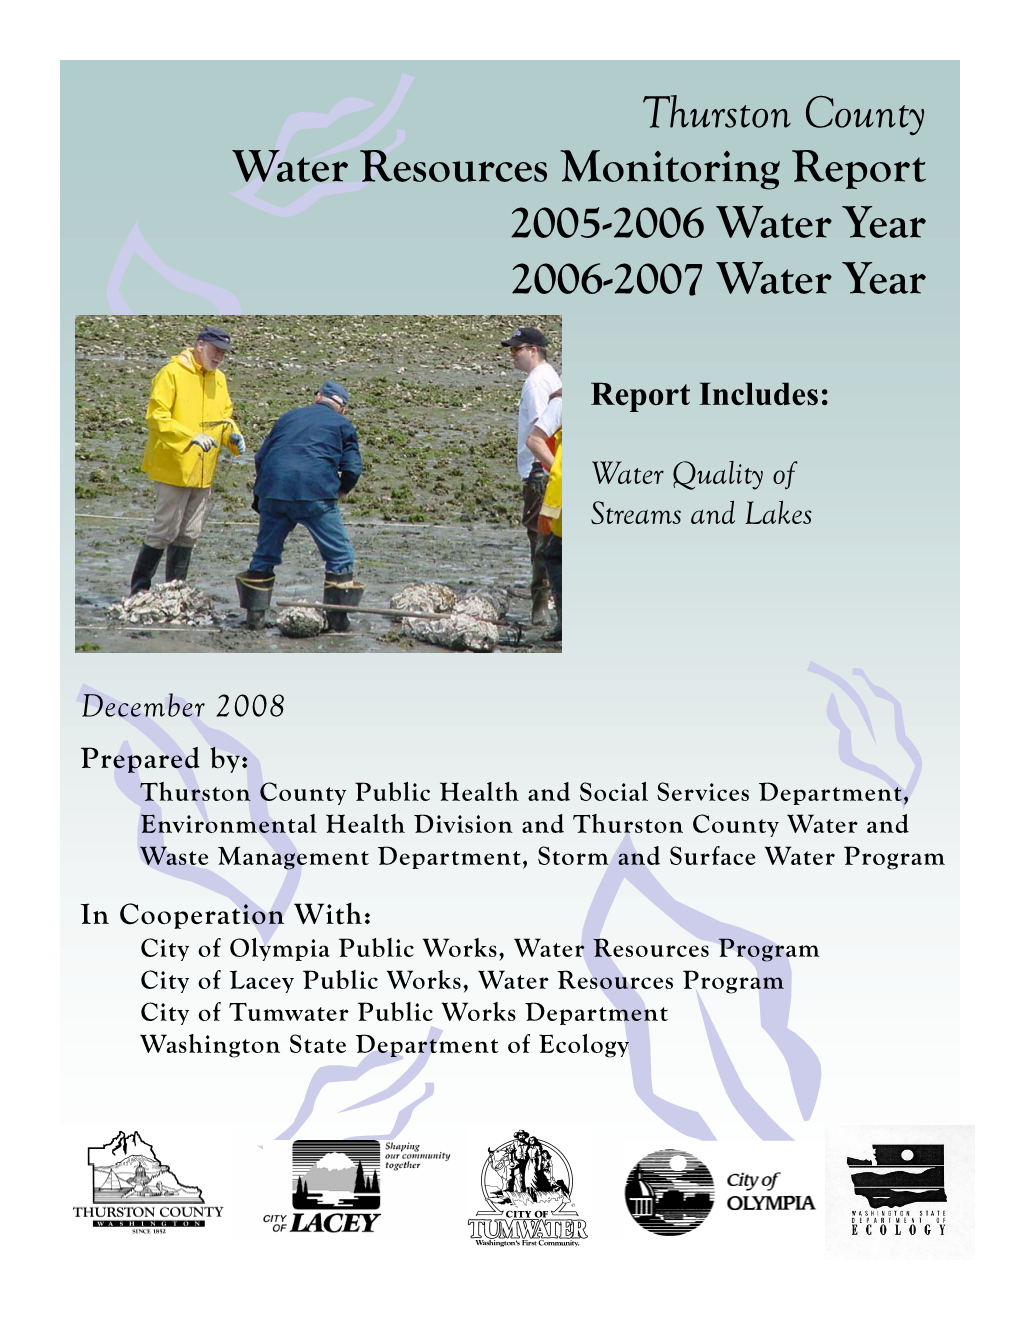 Thurston County Water Resources Monitoring Report 2005-2006 Water Year 2006-2007 Water Year